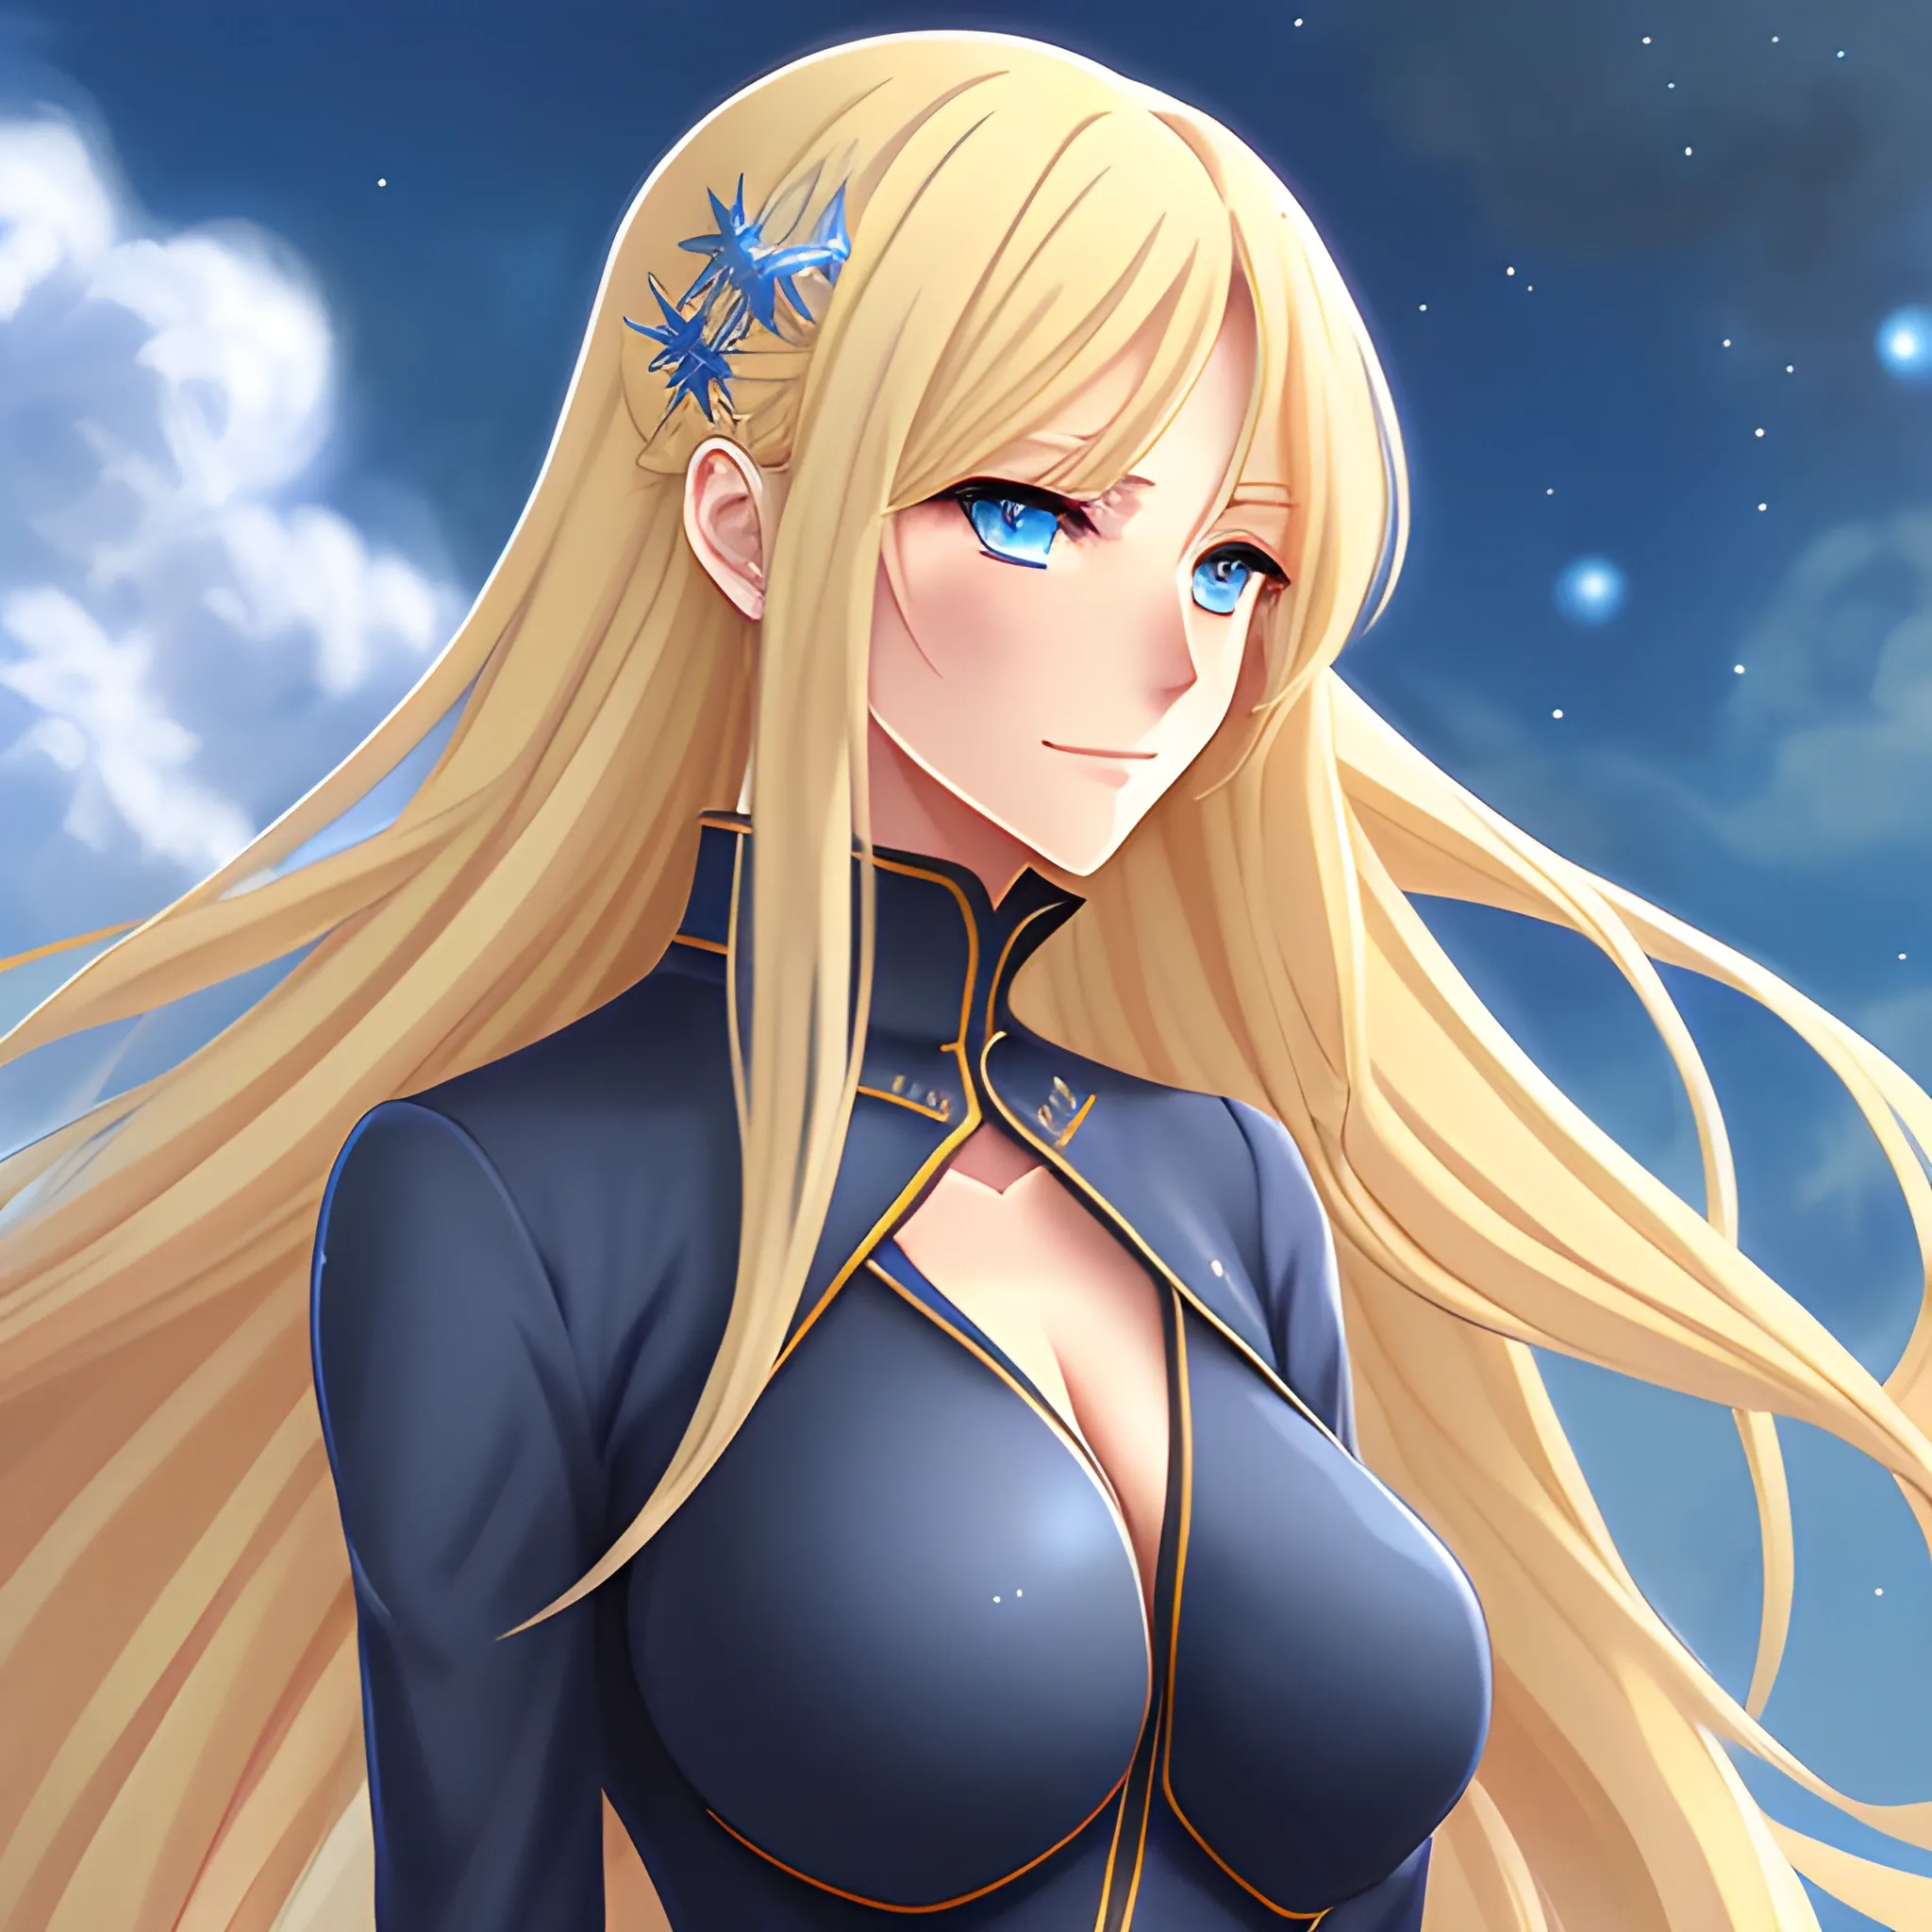 anime art of cute girl with blond semi-long hair in movement, a slightly sad look,  teary blue eyes, highly detailed, her clothing style is somewhat revealing, luminous aura around herself, magic fantasy sky in background, digital painting
